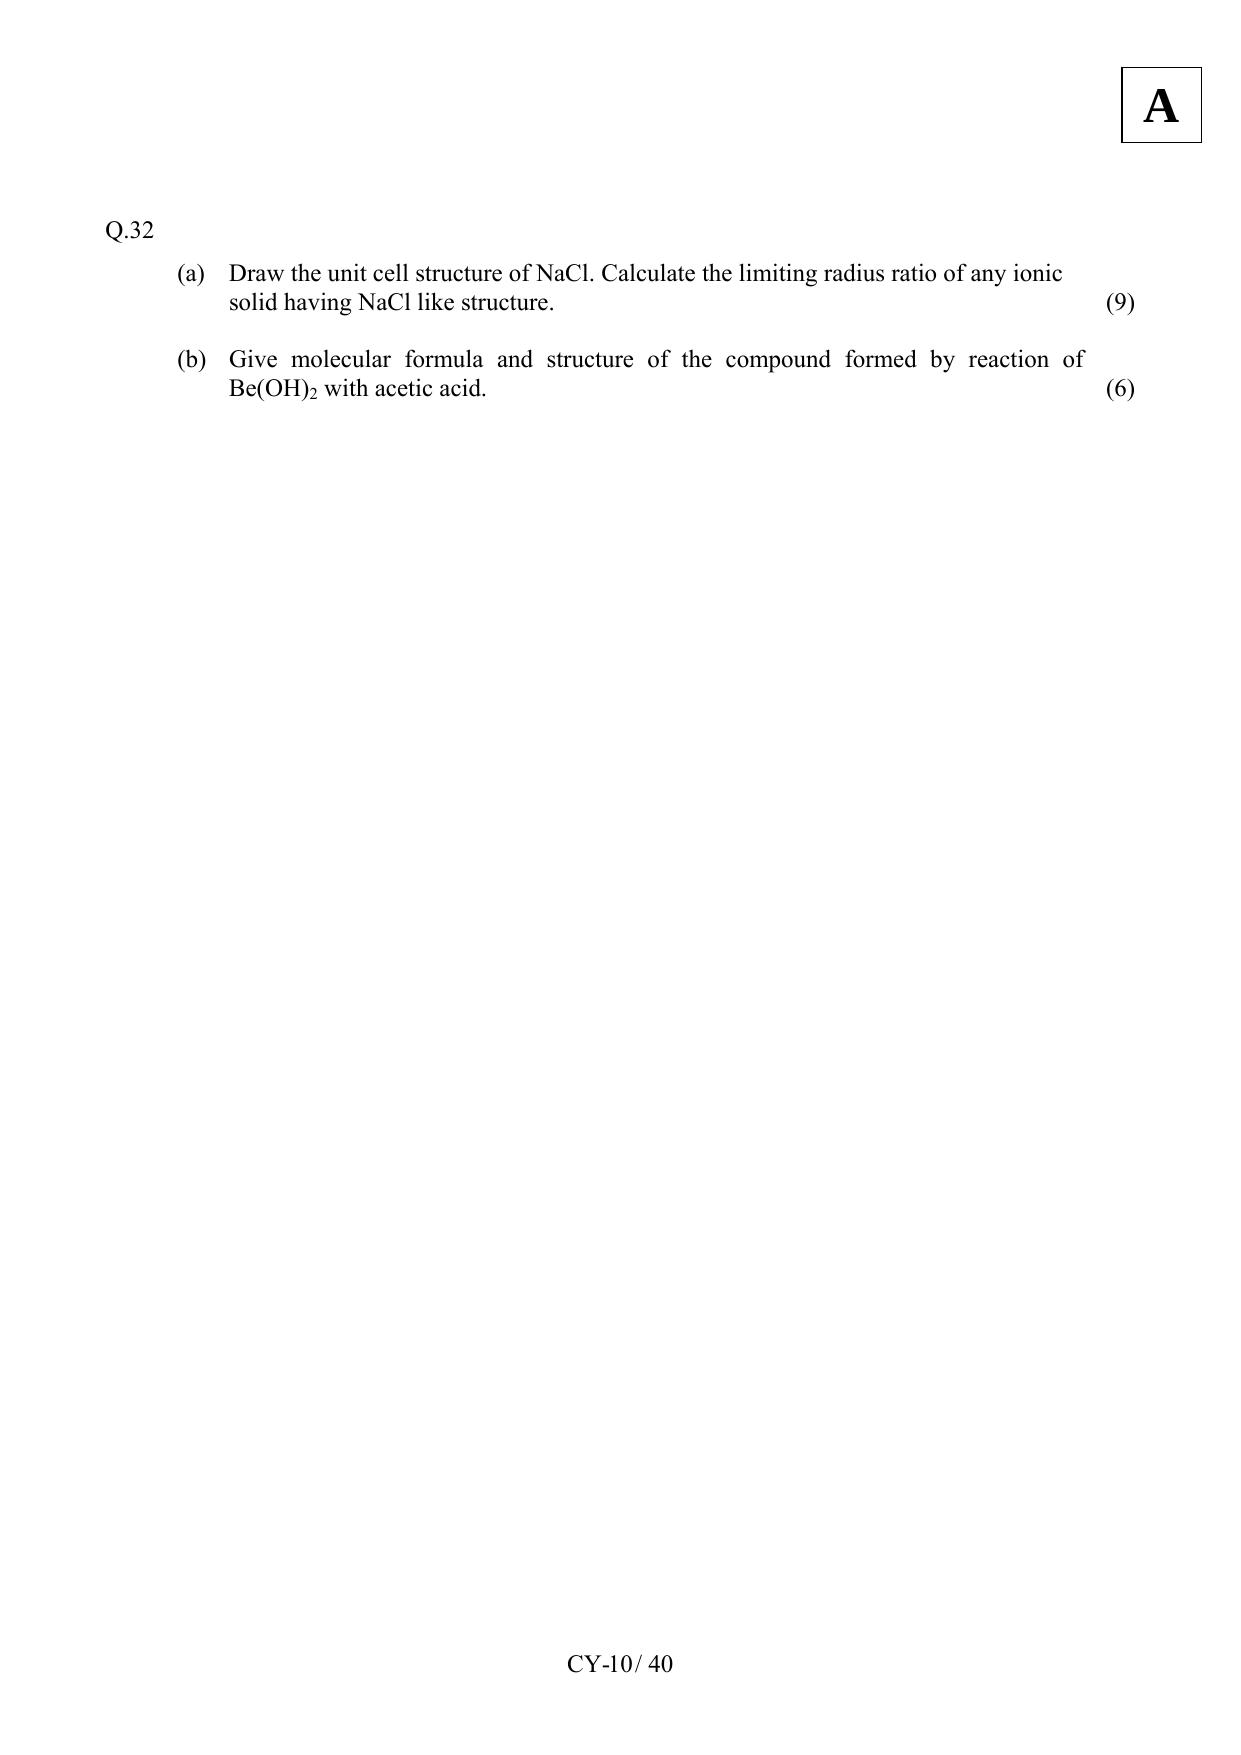 JAM 2012: CY Question Paper - Page 12